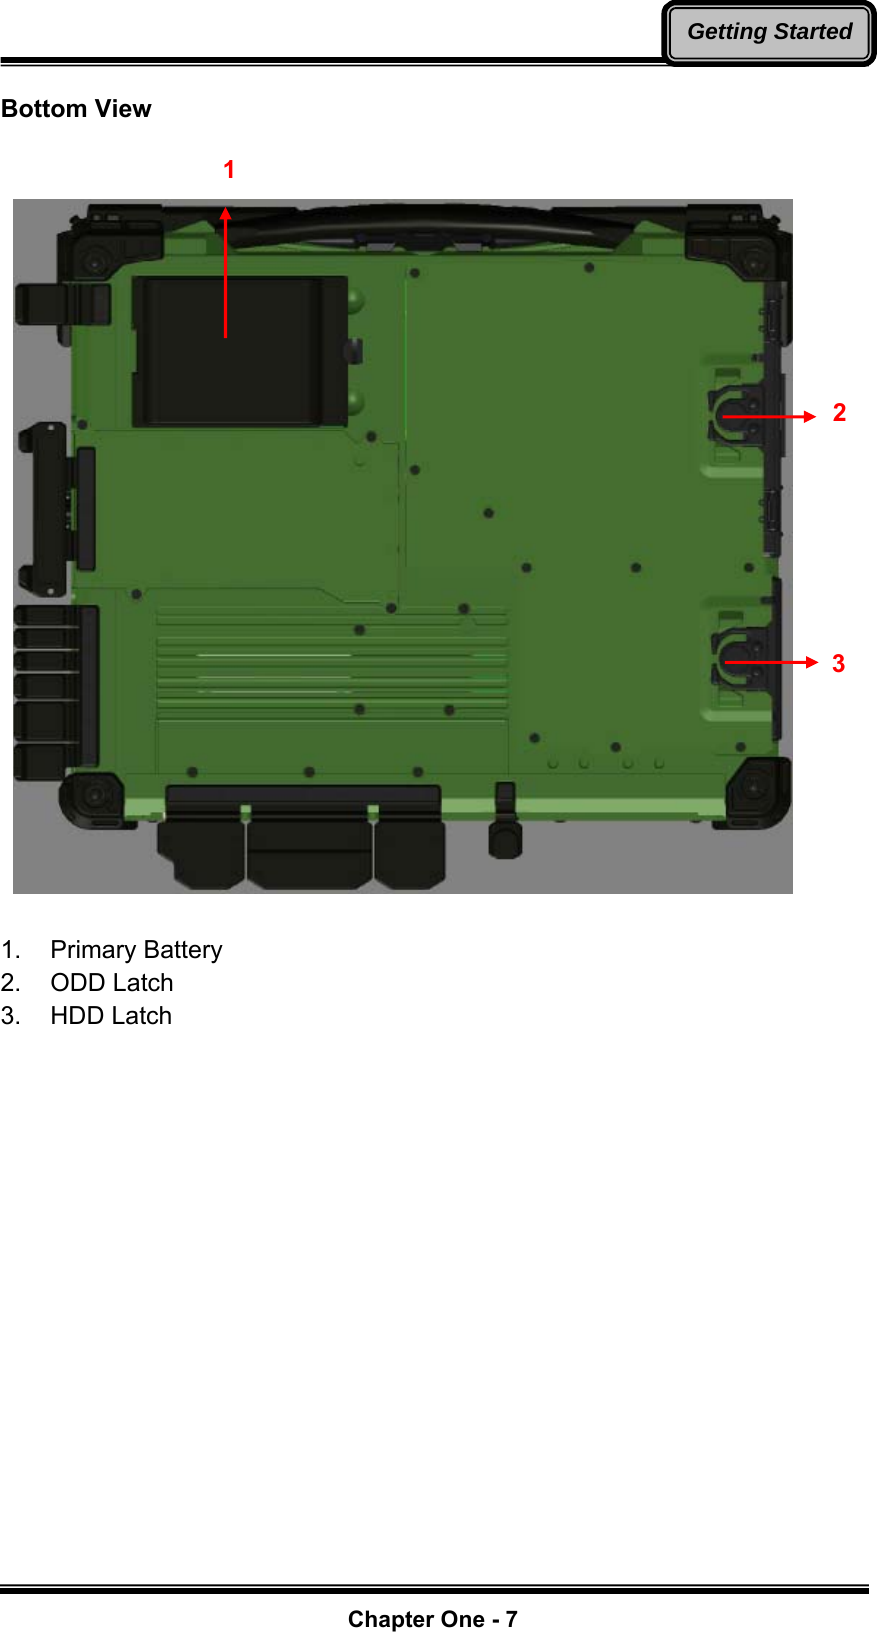   Chapter One - 7Getting StartedBottom View      1. Primary Battery 2. ODD Latch 3. HDD Latch    1  2  3 